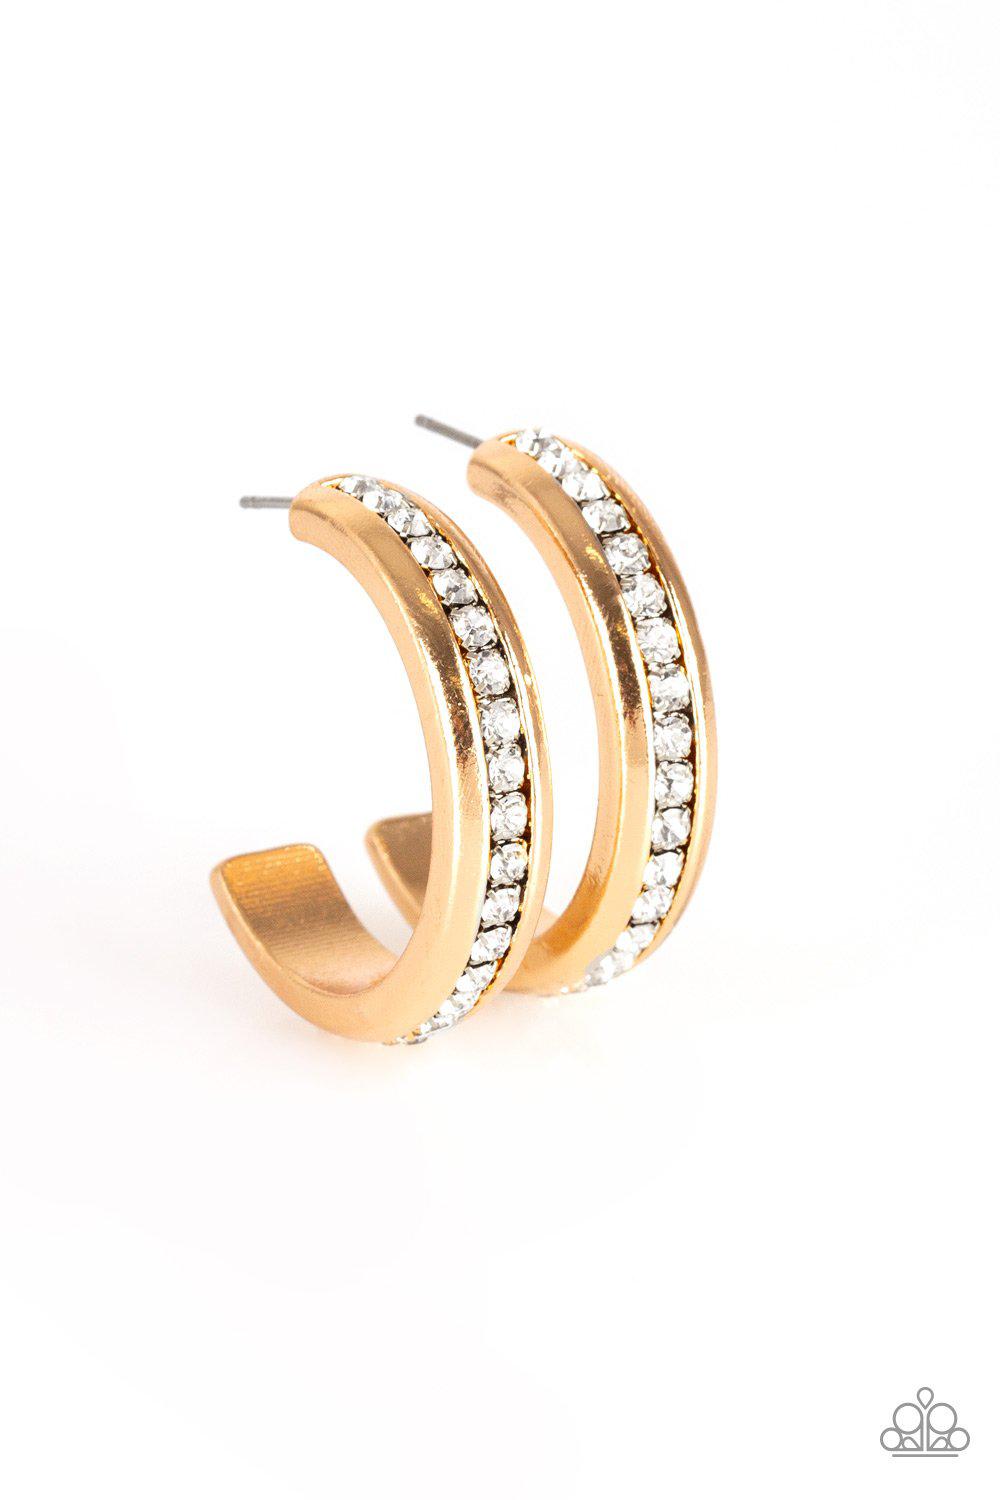 5th Avenue Fashionista Gold and White Hoop Earrings - Paparazzi Accessories-CarasShop.com - $5 Jewelry by Cara Jewels